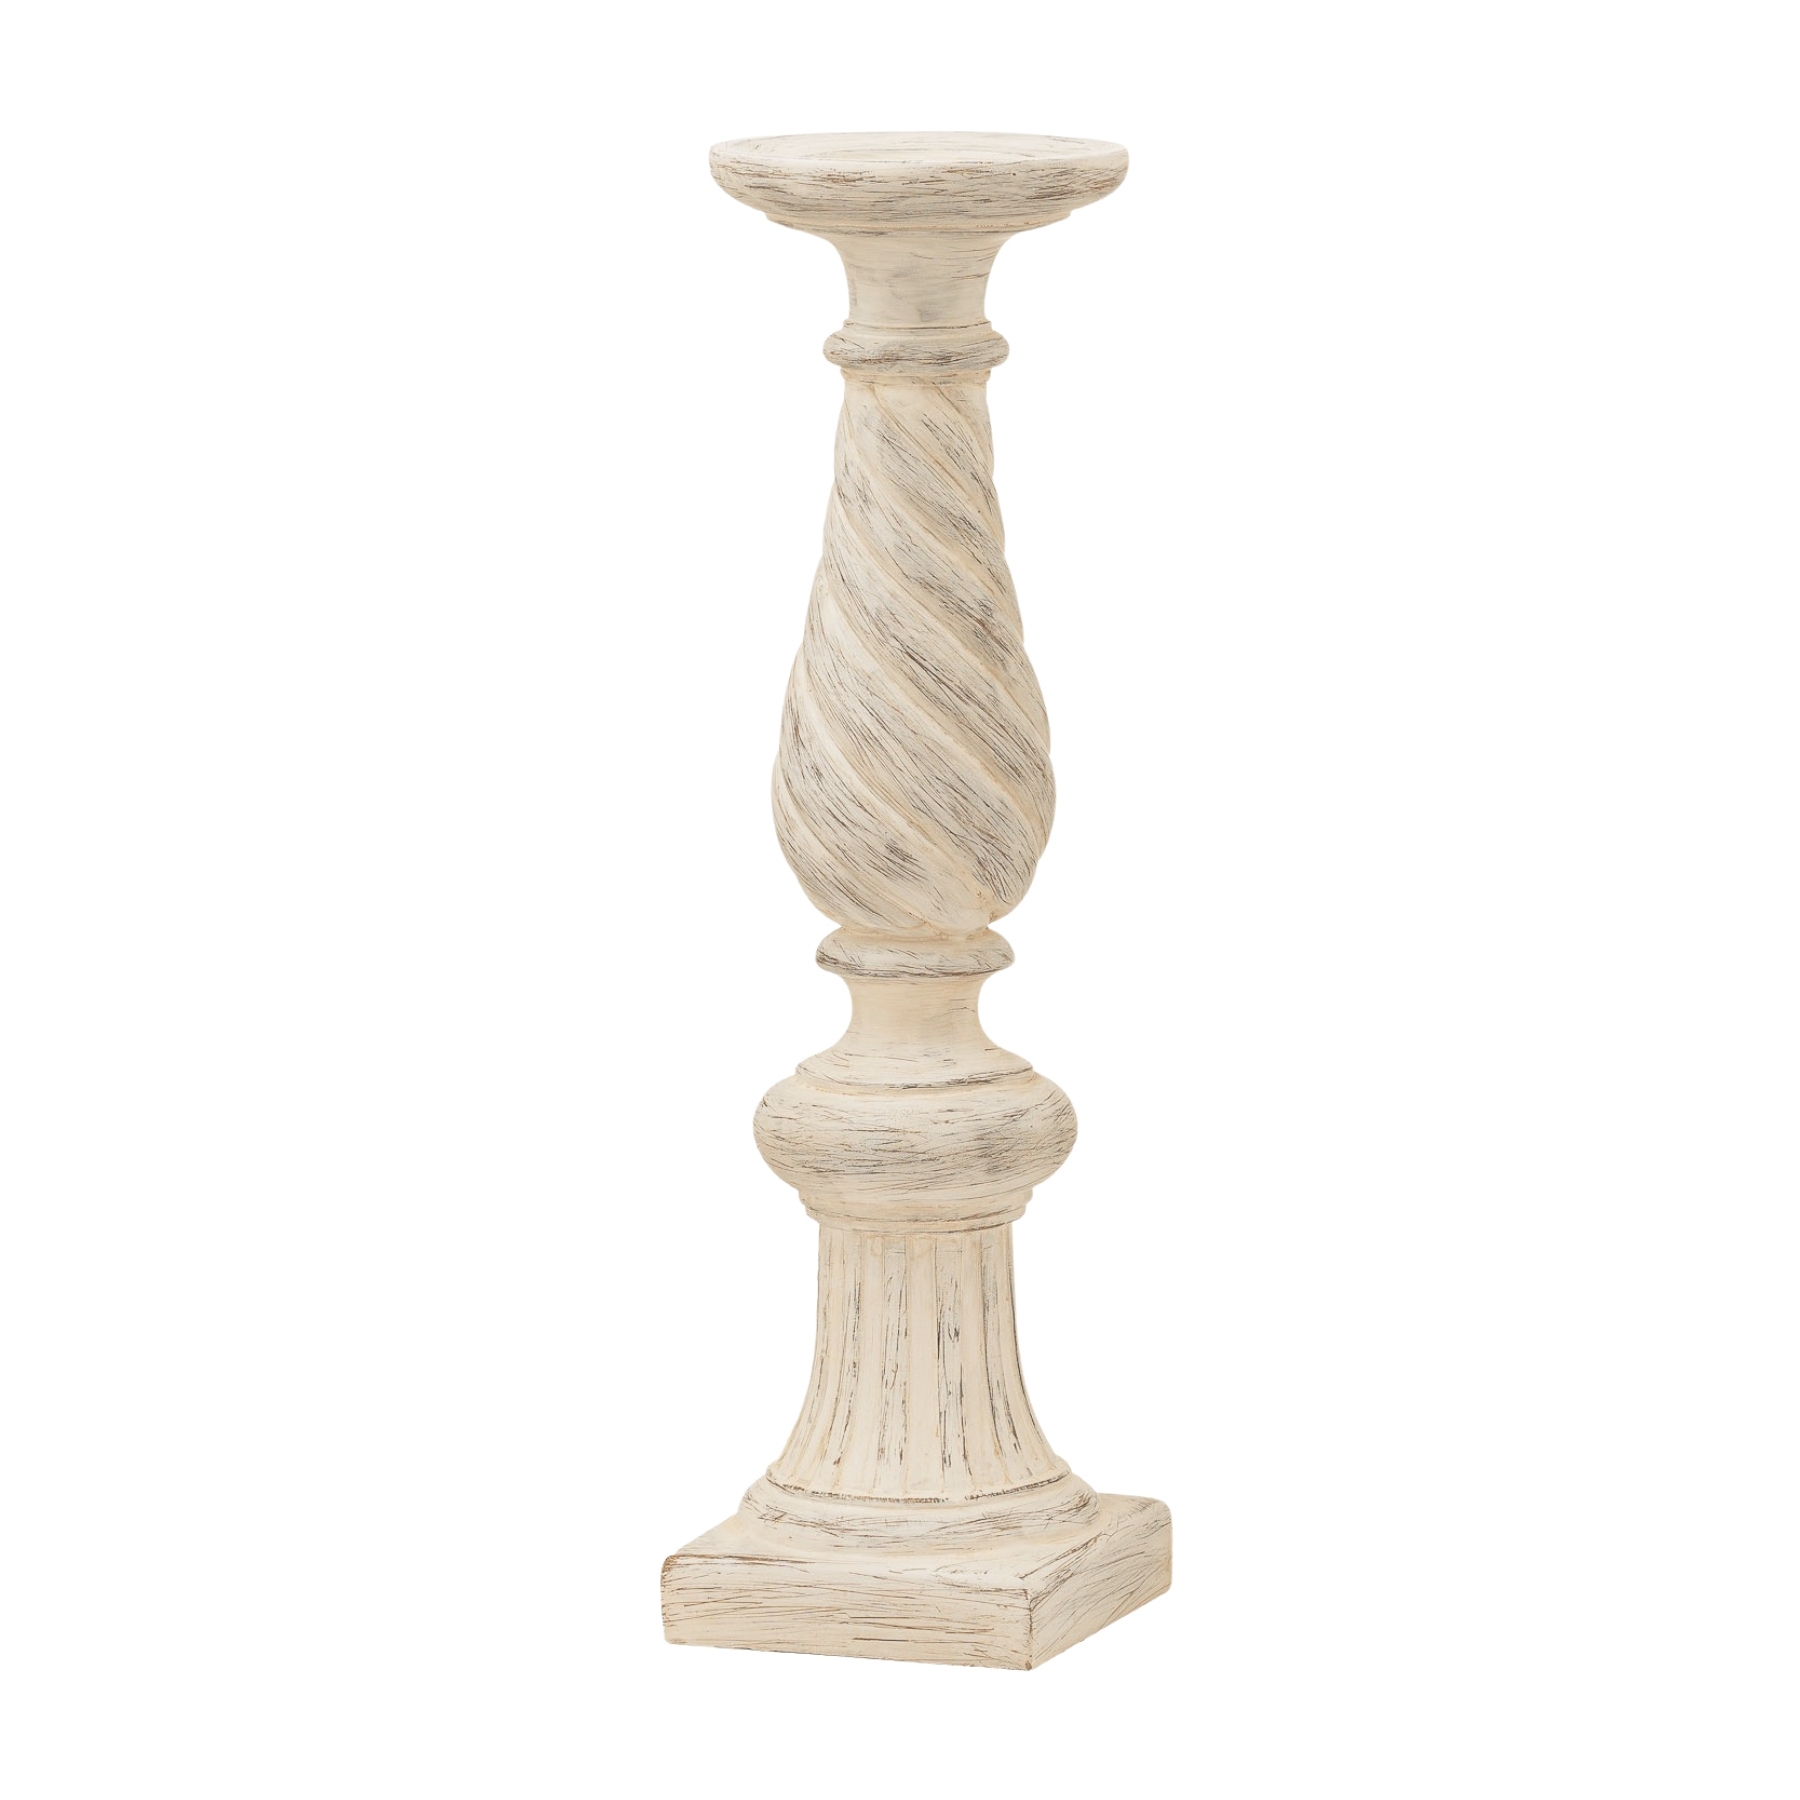 Antique White Twisted Candle Column - Image 1